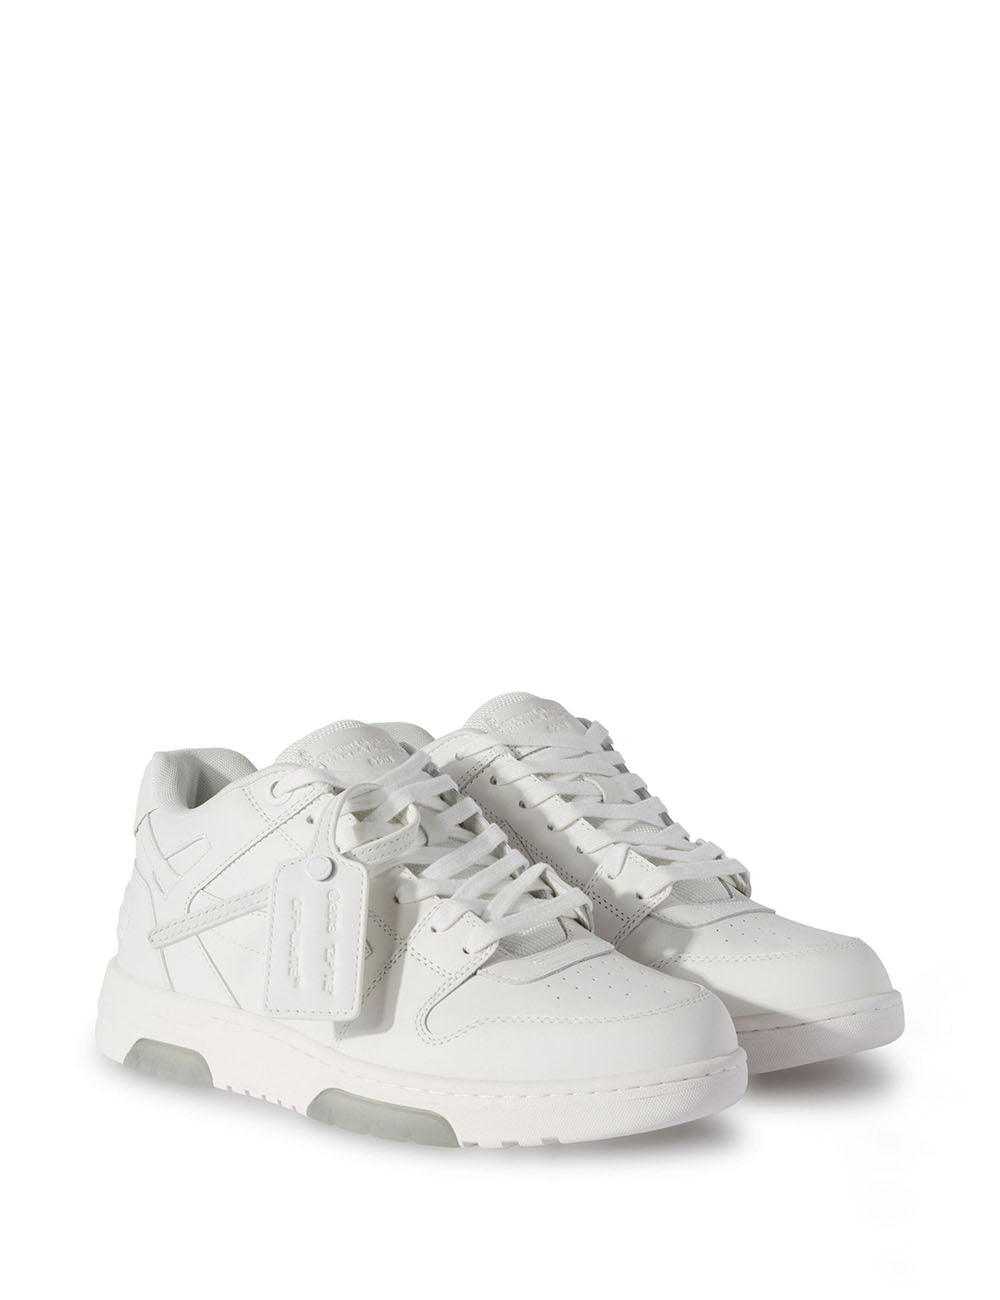 OFF WHITE OUT OF OFFICE CALF LEATHER